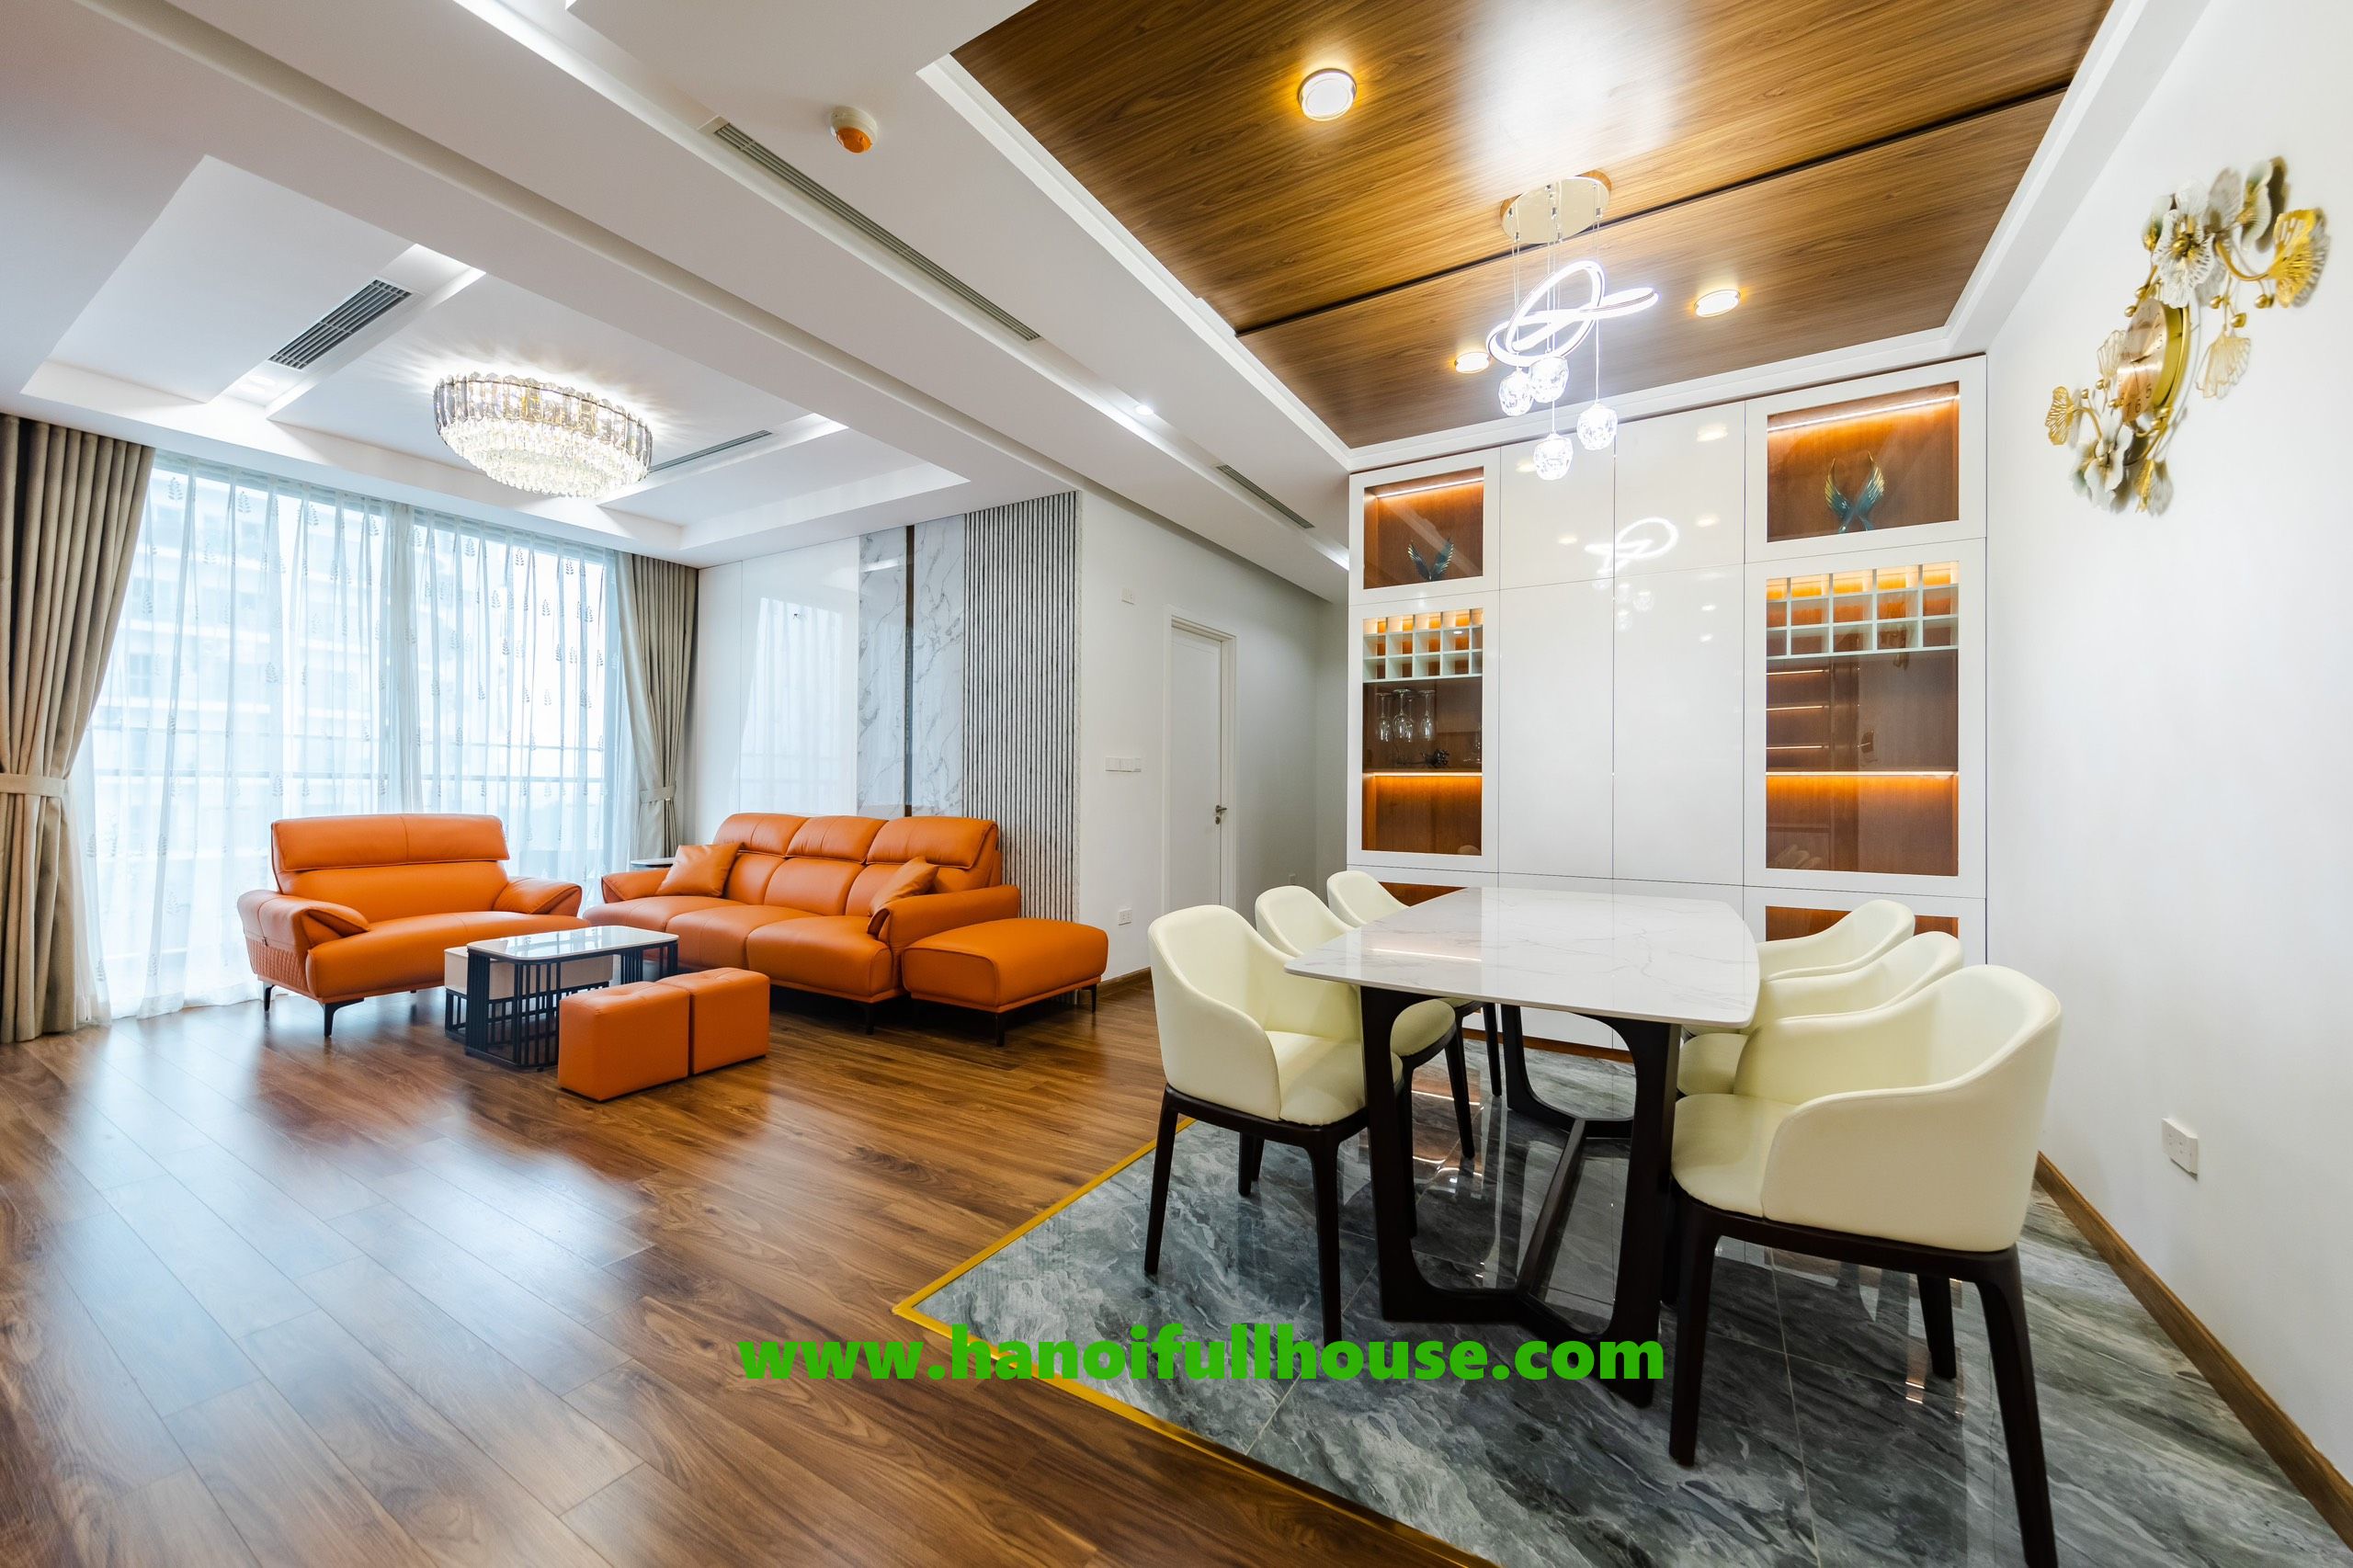 Luxury 3-BR apartment with balcony overlooking West Lake in FiveStar West Lake building